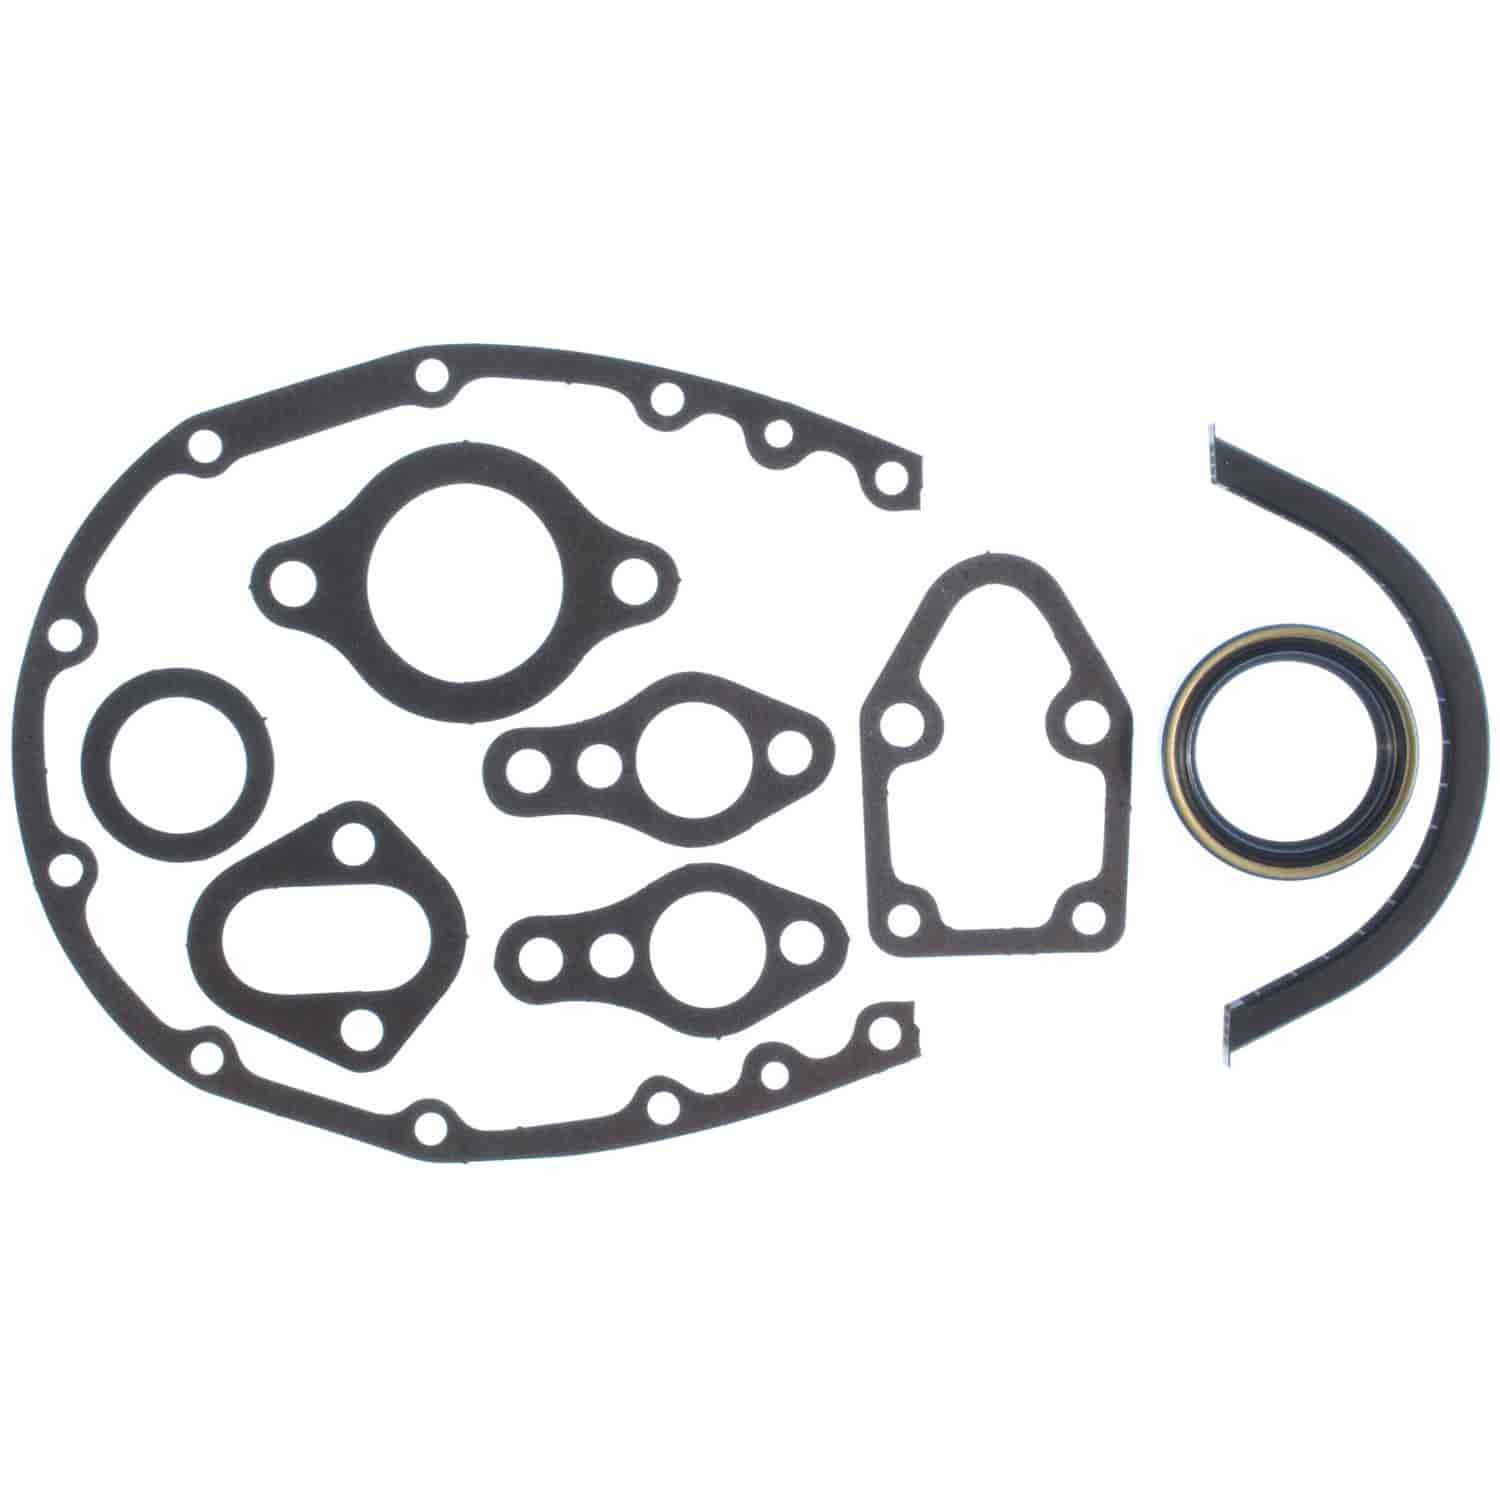 Clevite MAHLE Timing Cover Gasket Set 1975-1986 Small Block Chevy  262/305/350/400